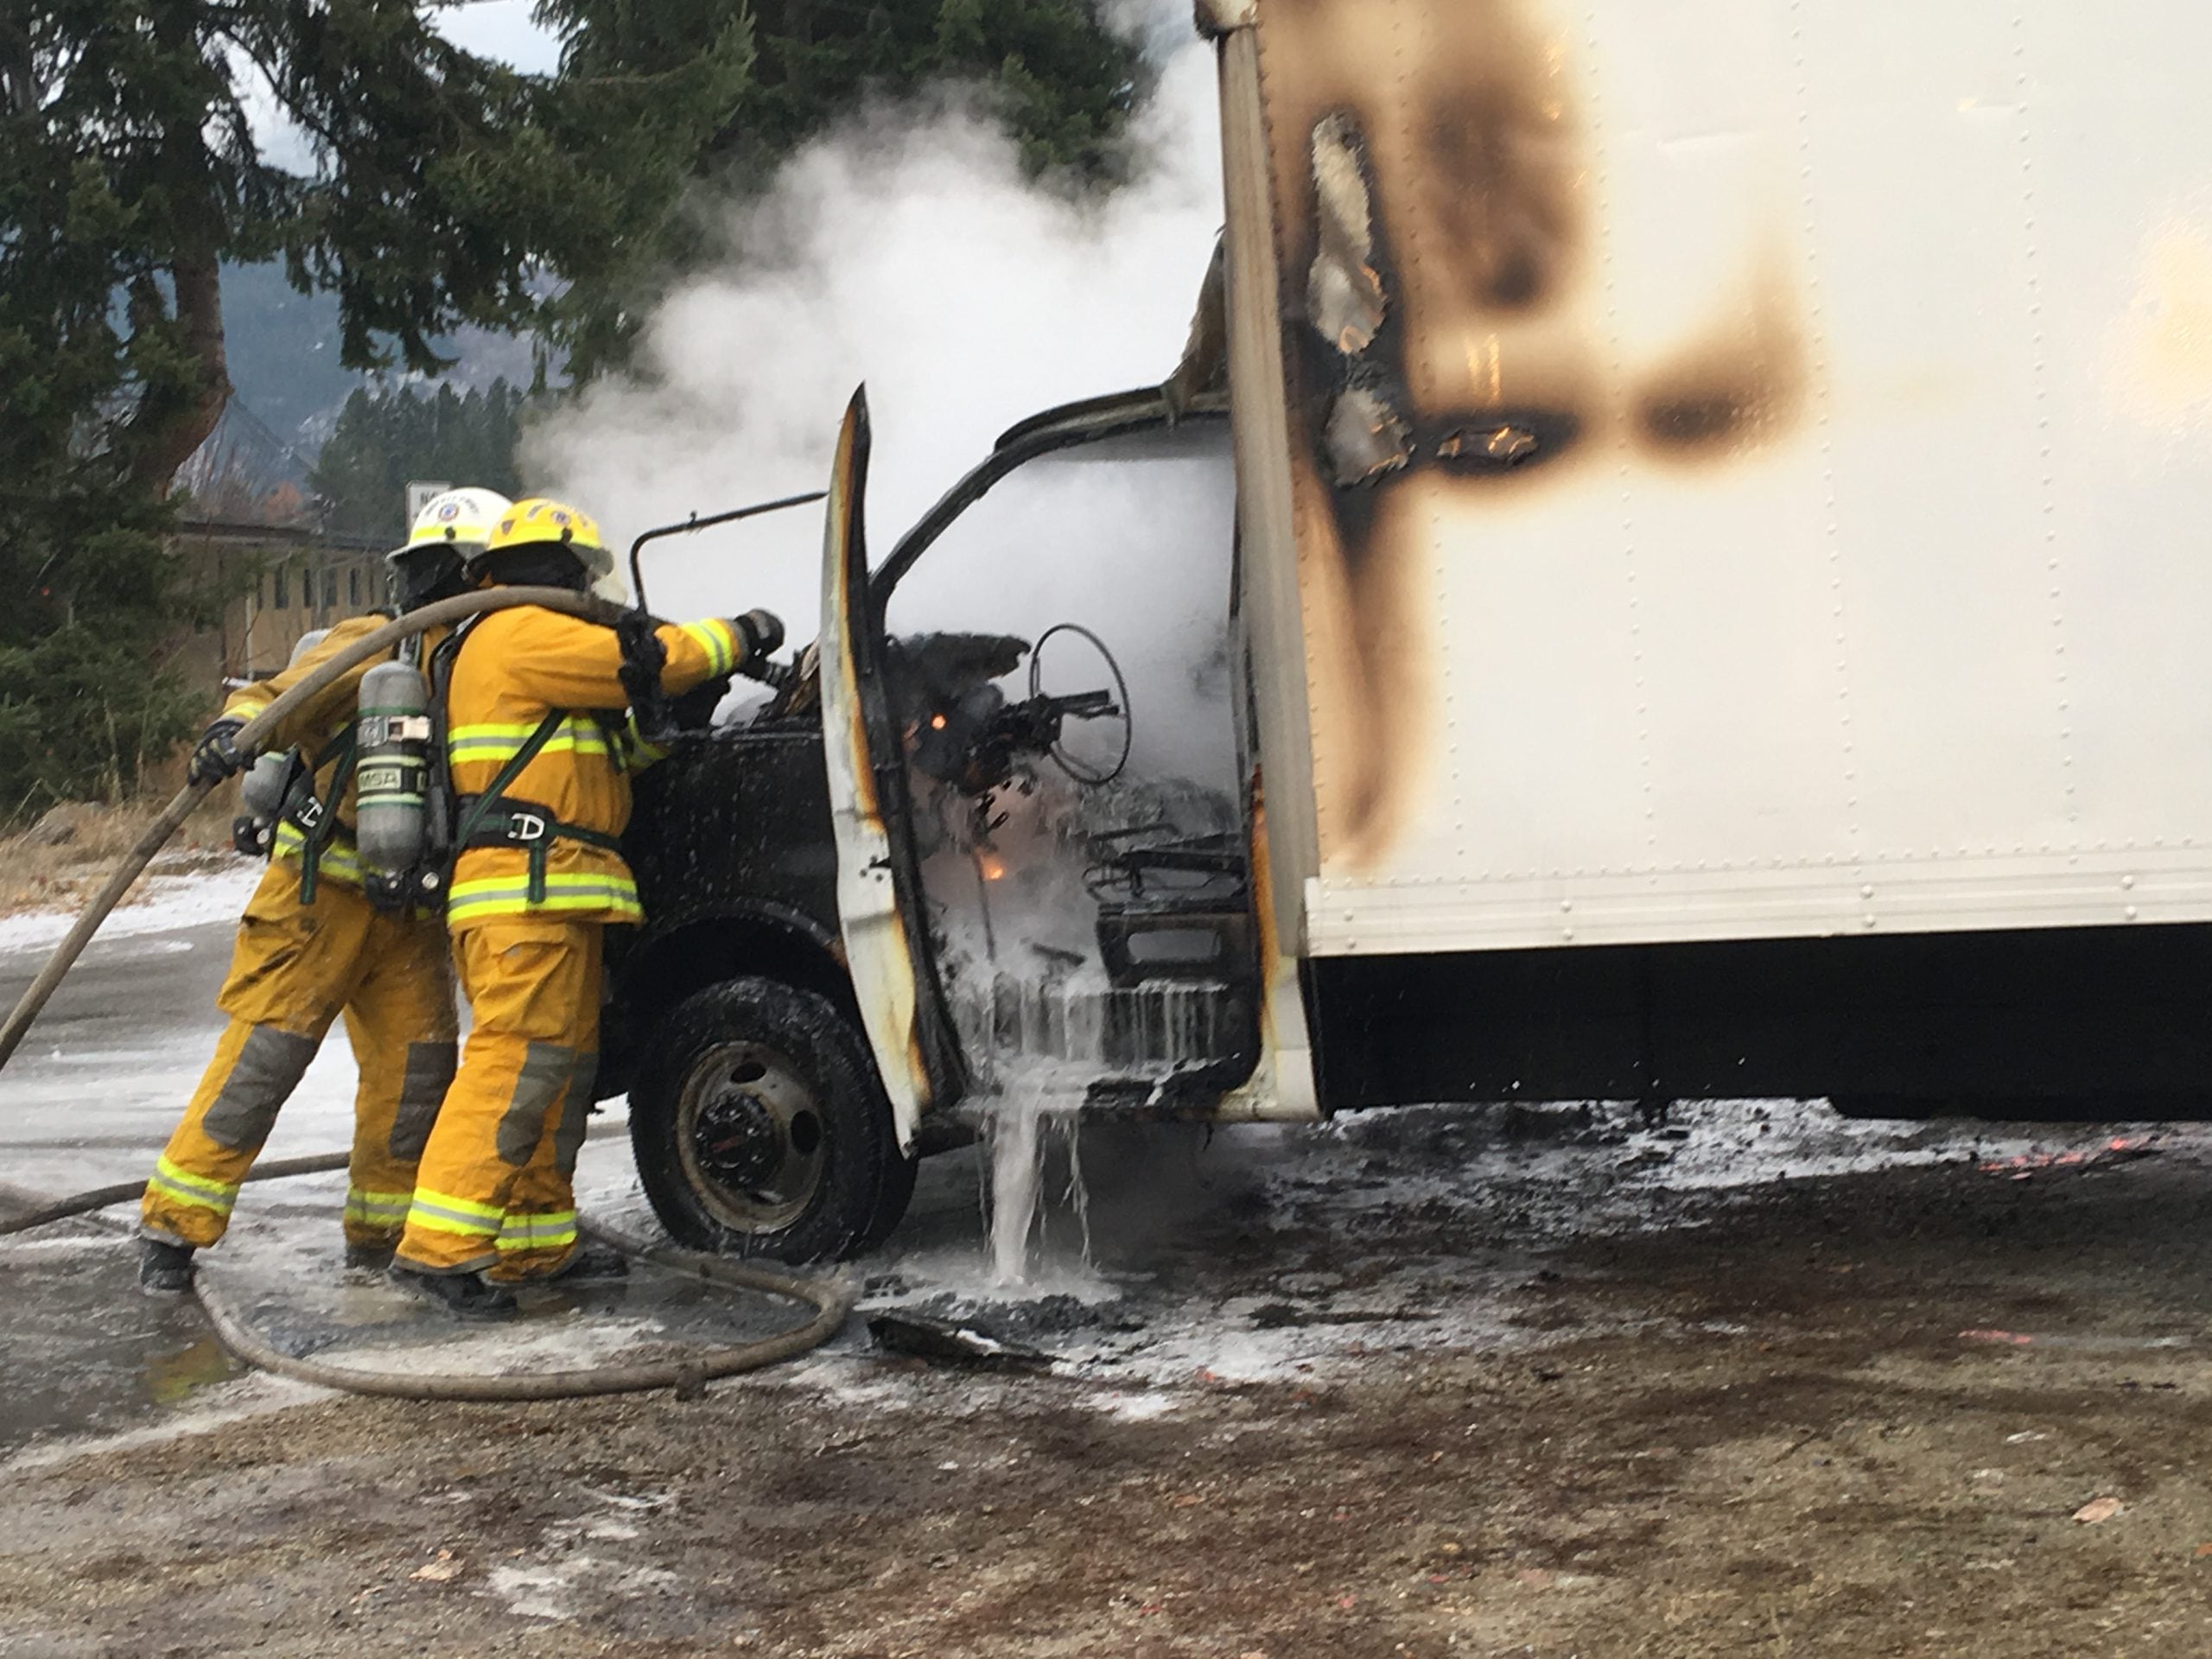 No one injured in truck fire Wednesday morning